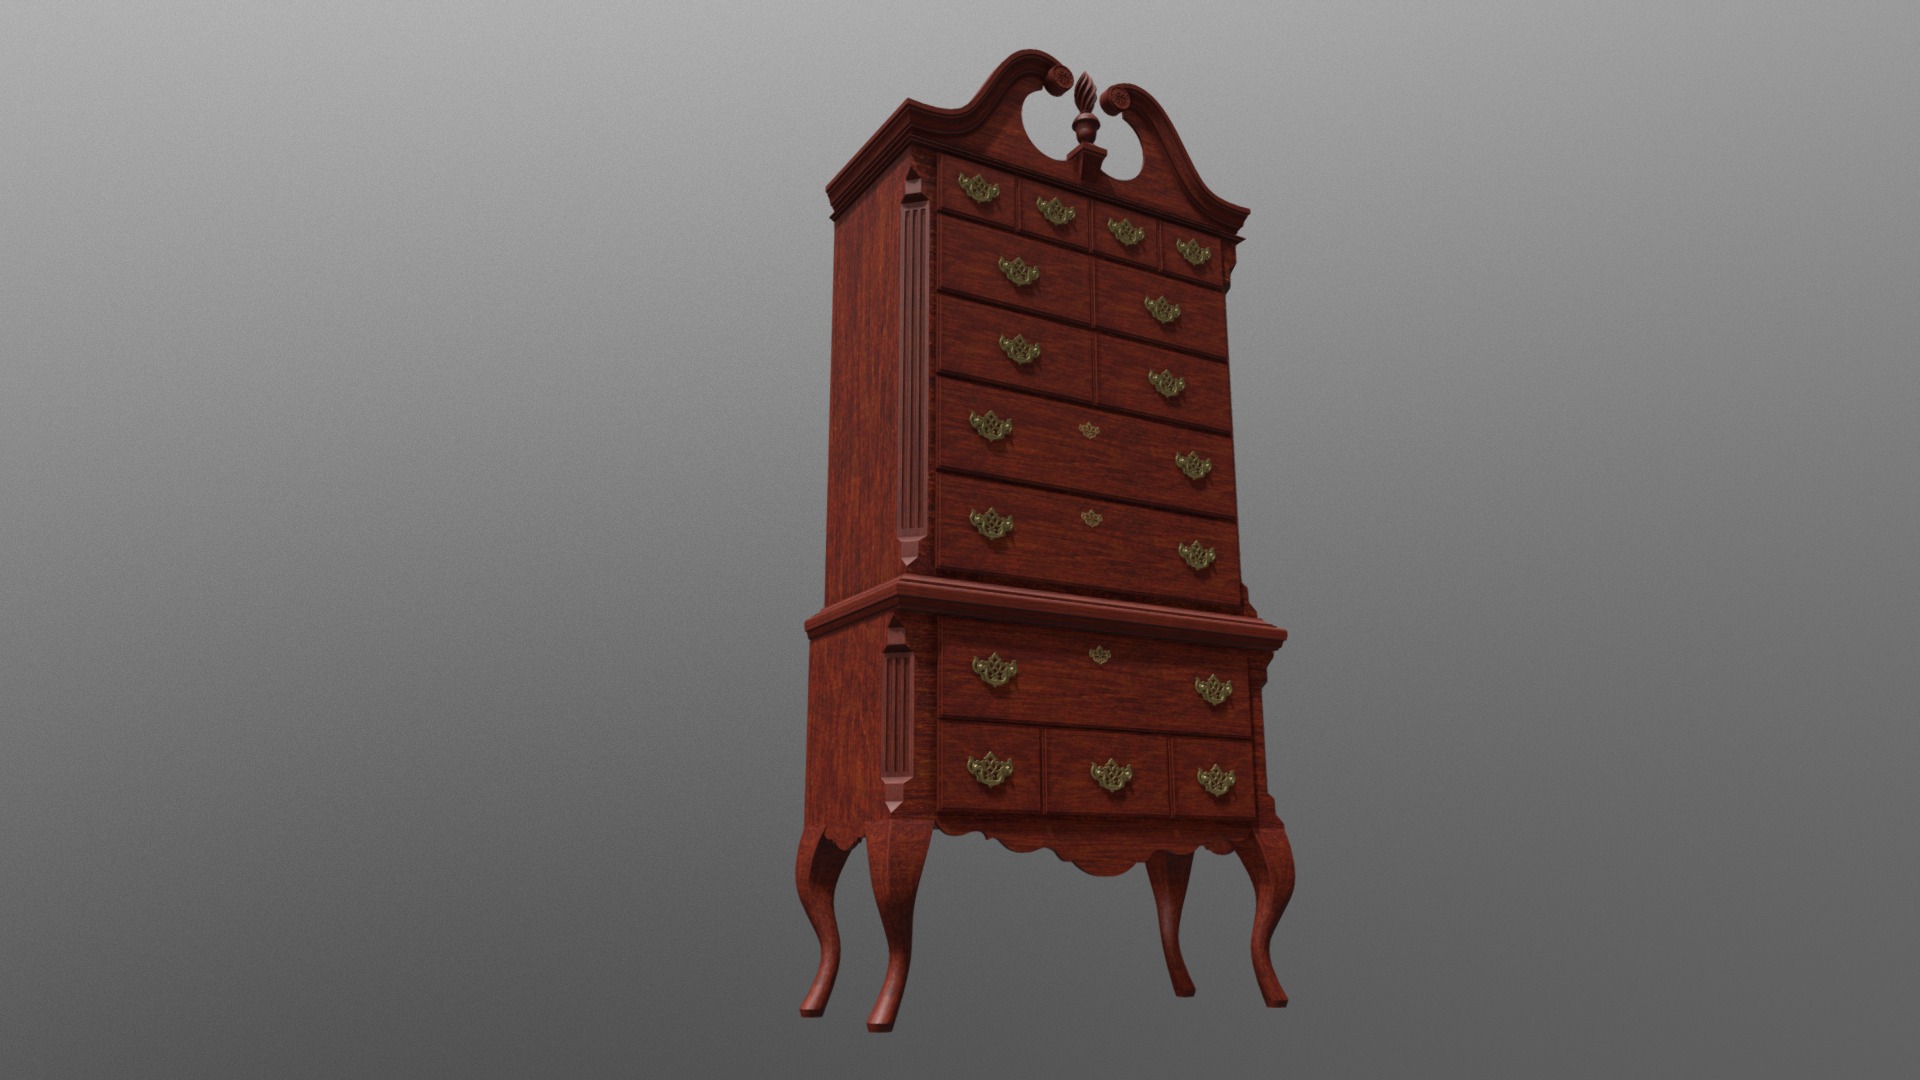 3D model Highboy - This is a 3D model of the Highboy. The 3D model is about a wooden chest with a metal handle.